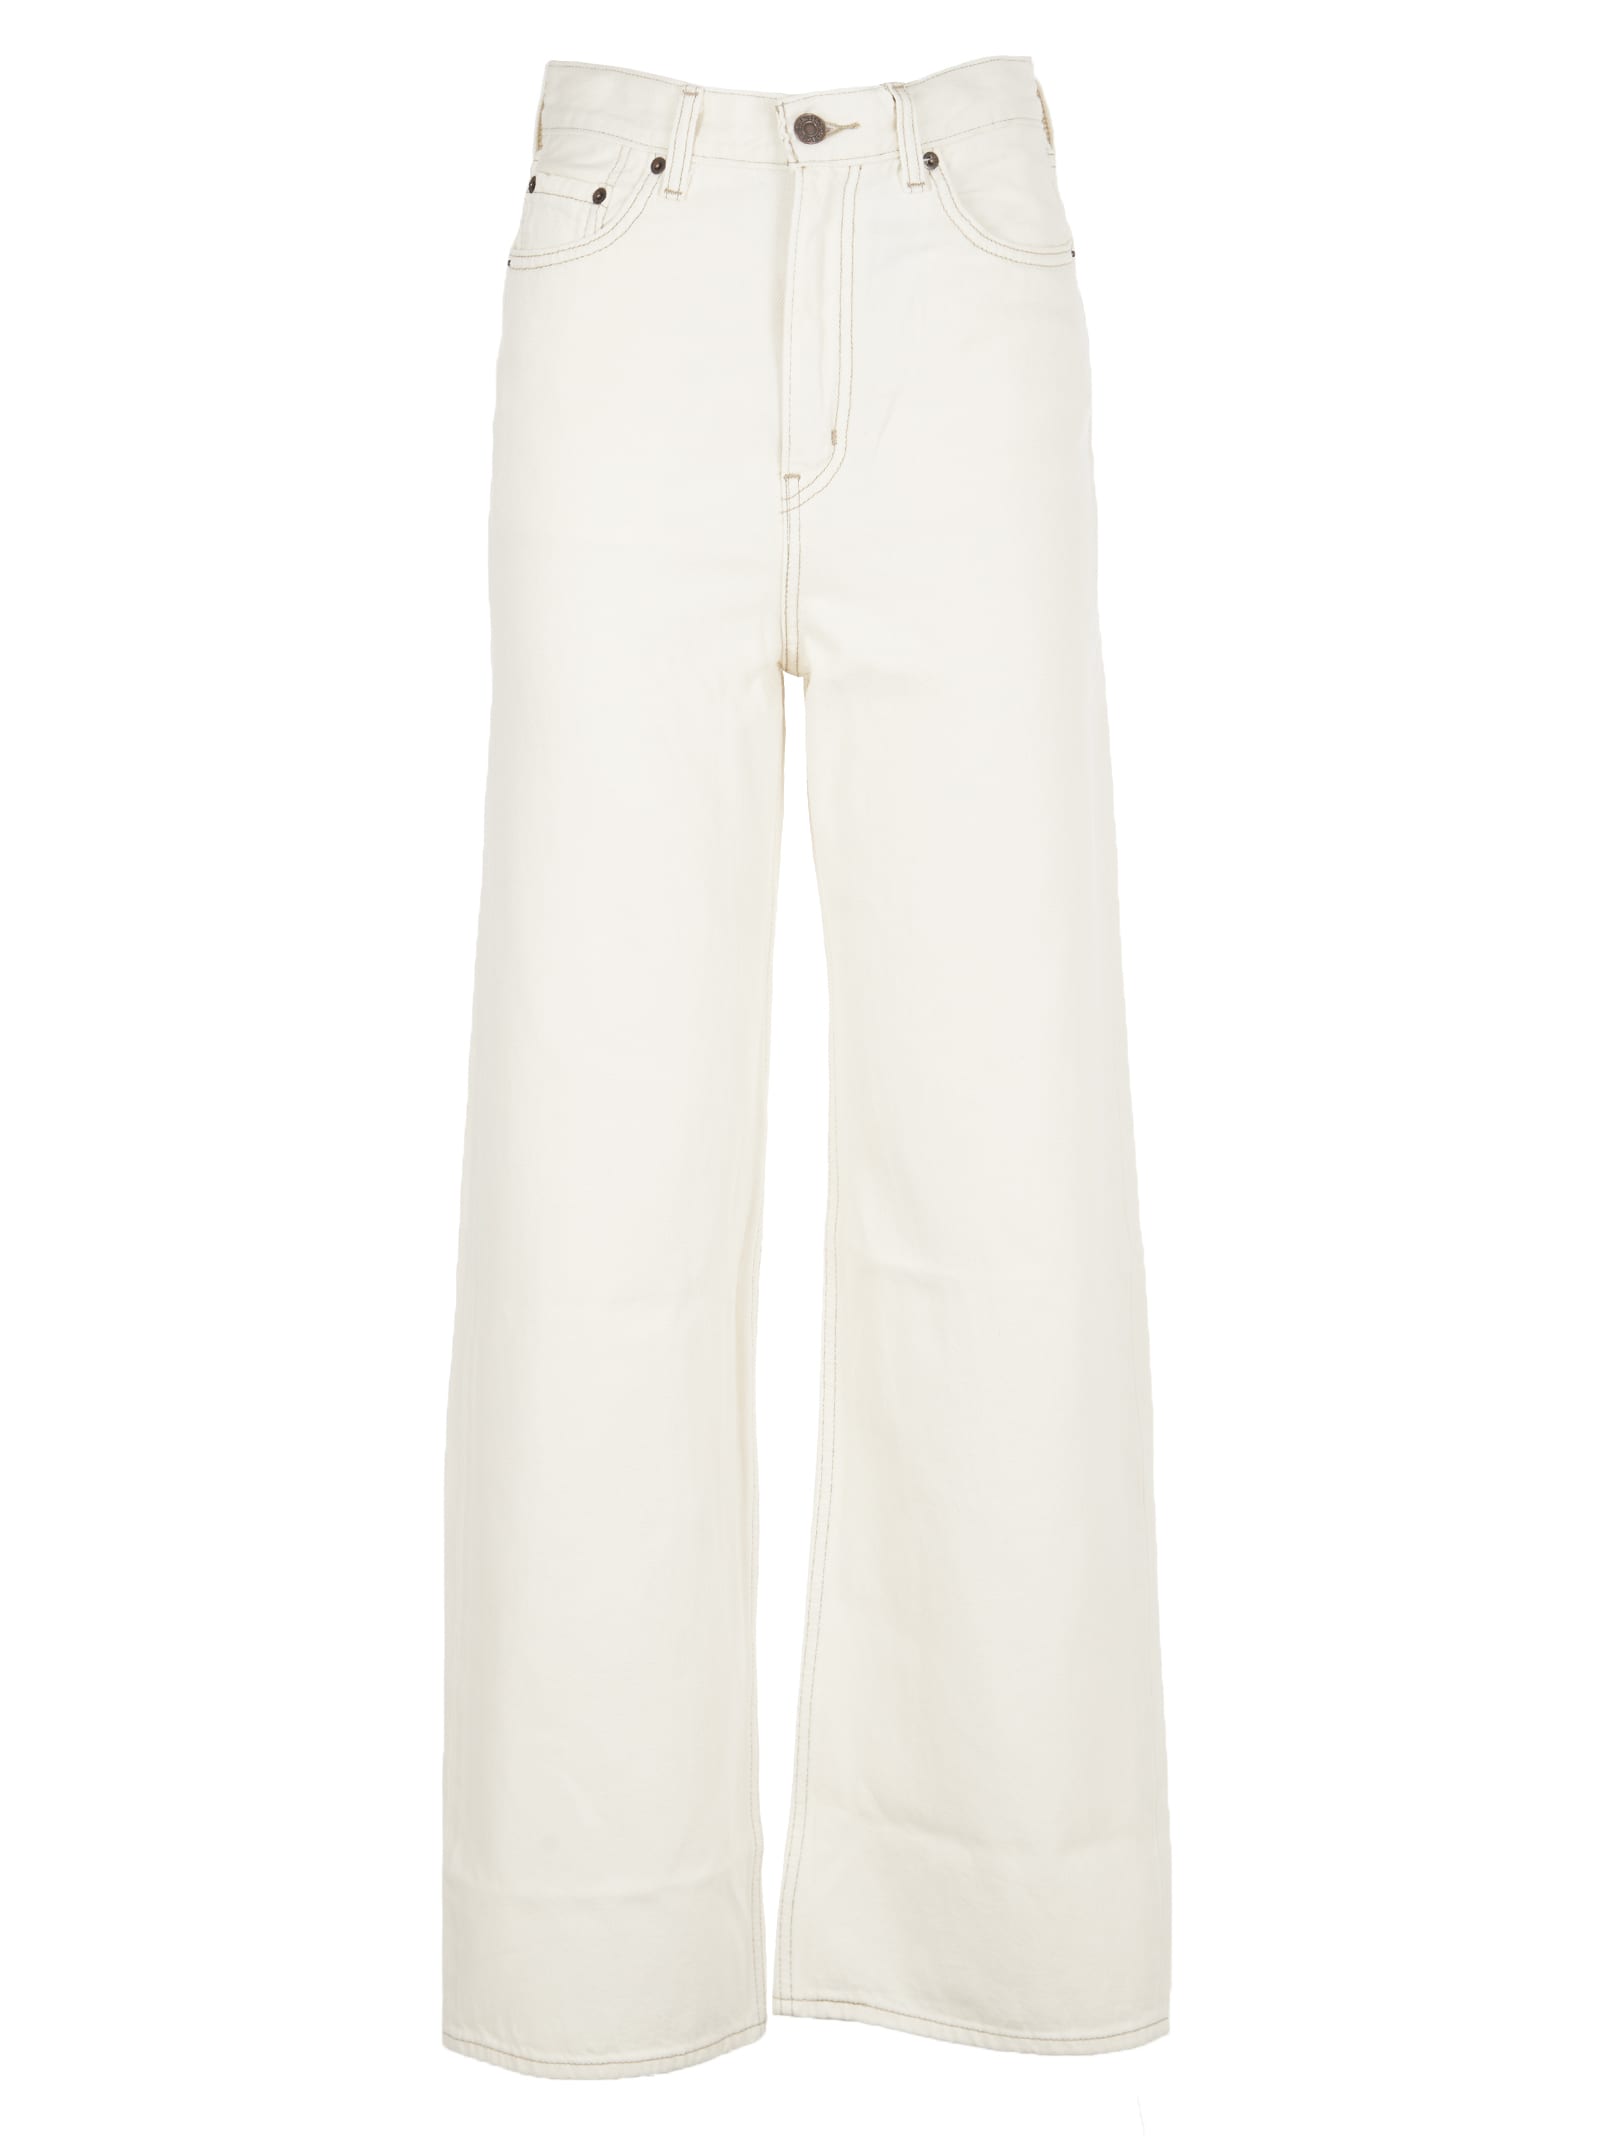 Levi's White High-waisted Jeans